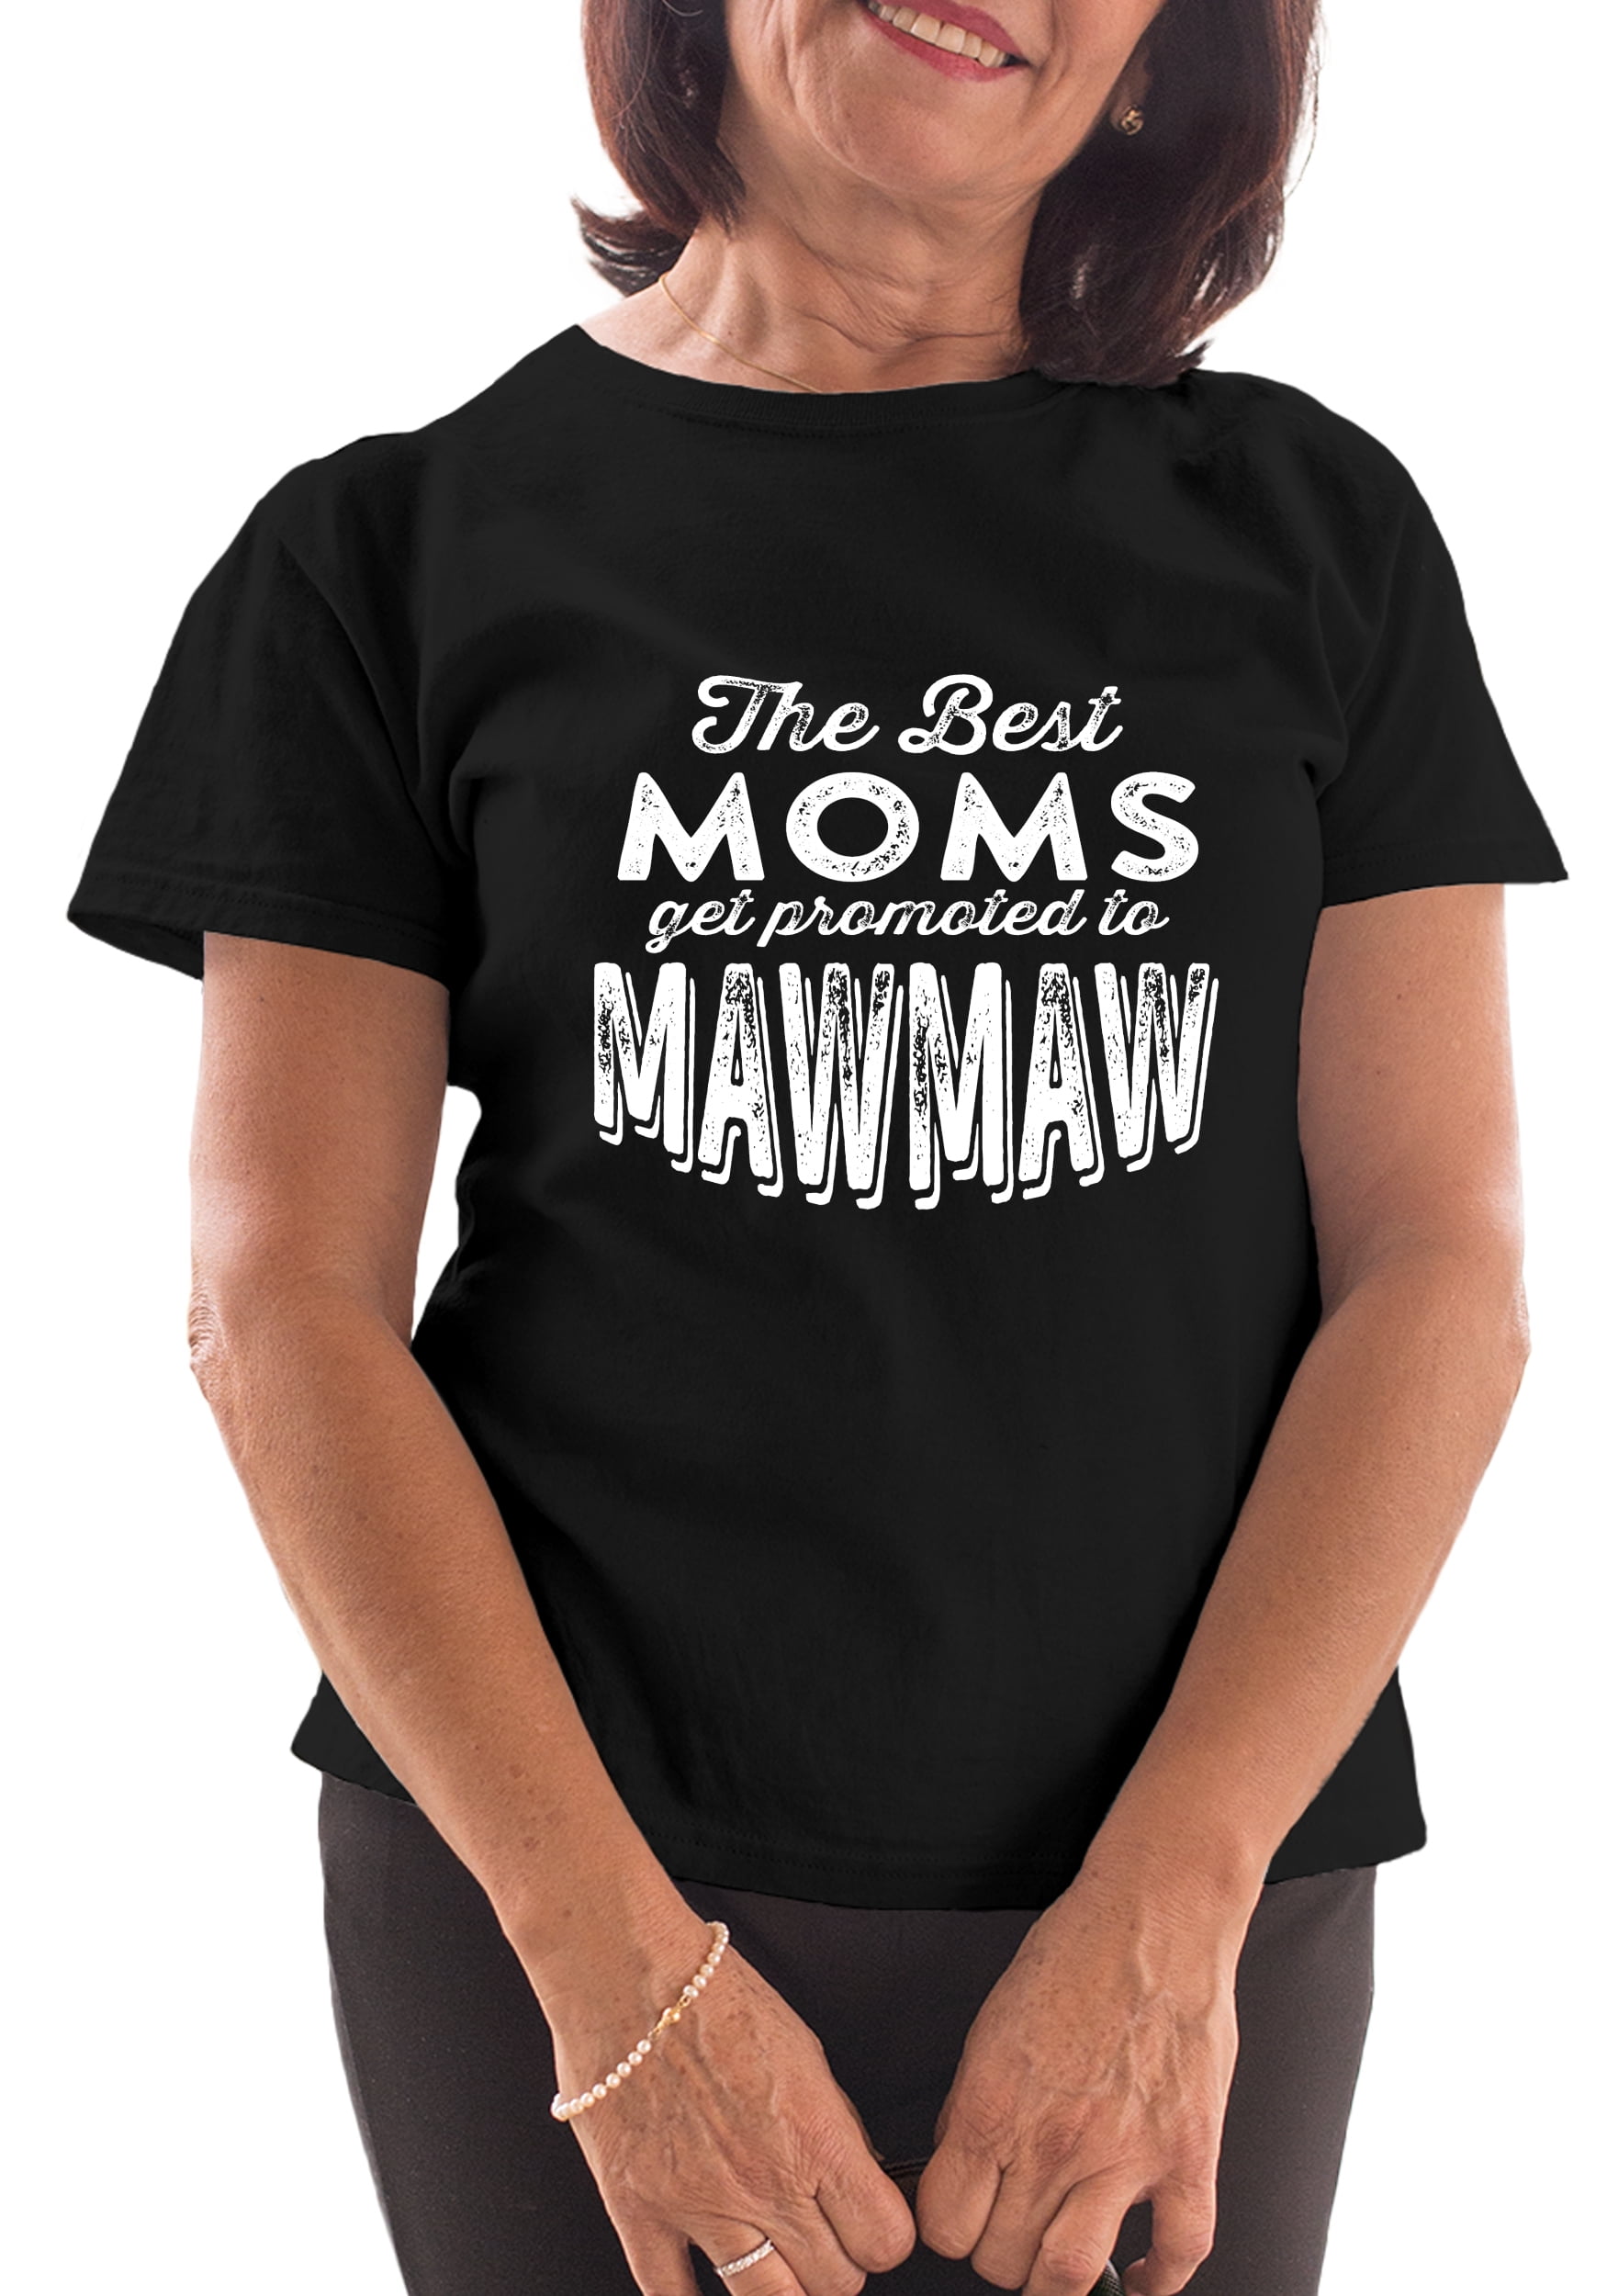 Awesome MAW MAW T Shirt Mothers Day Grandma Birthday Shower Gift Tee T Shirt